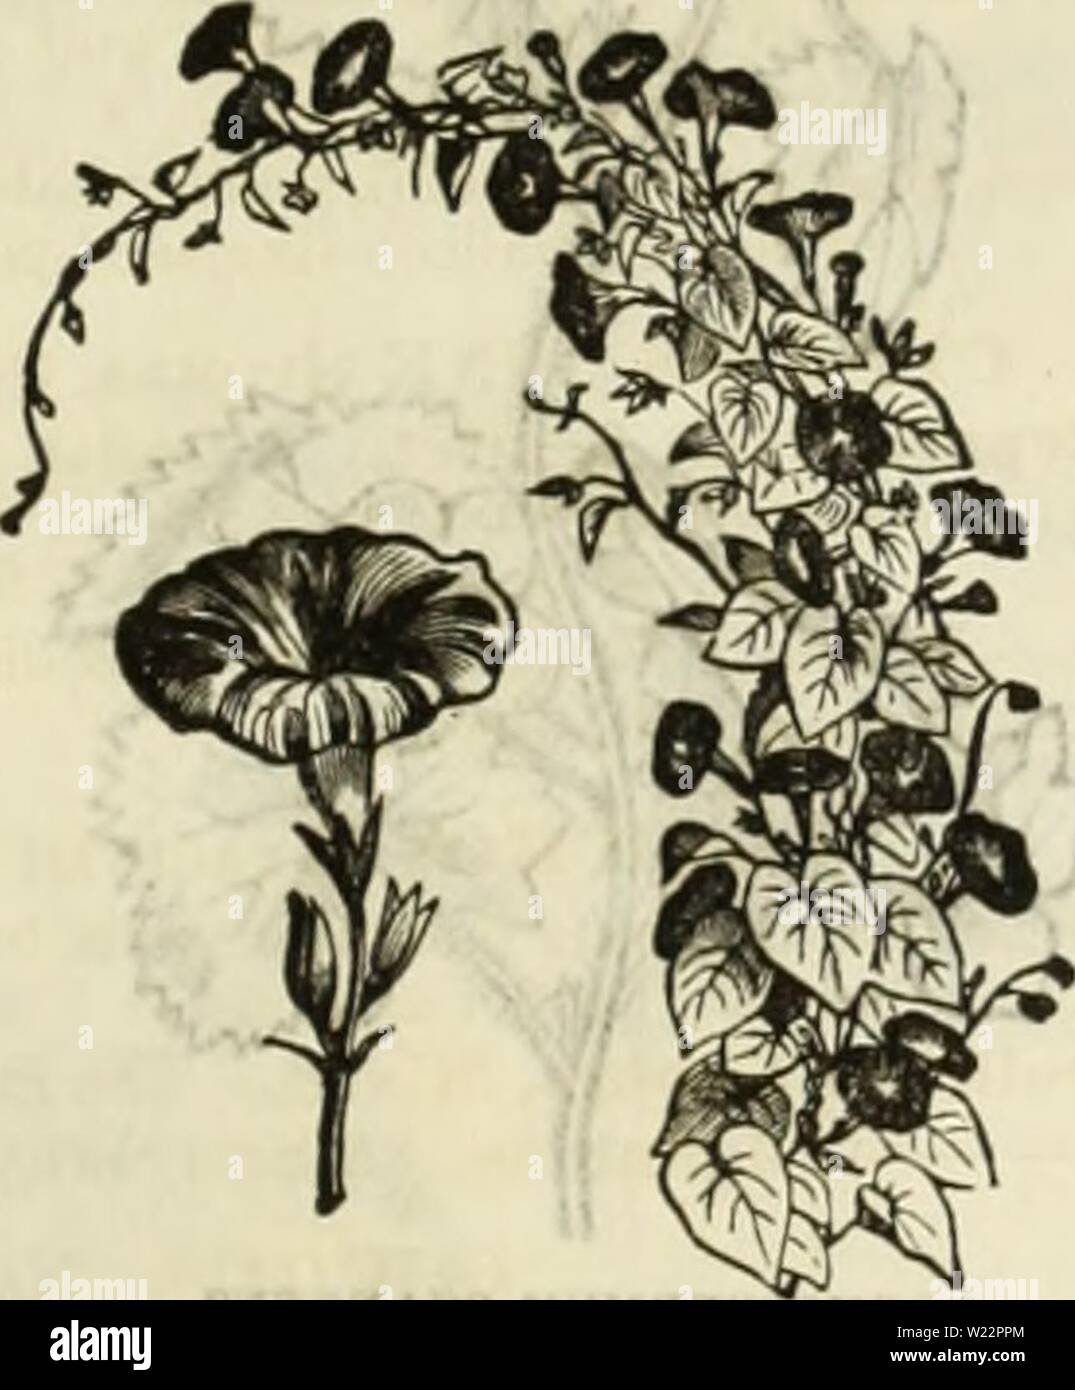 Archive image from page 106 of Curtis, Cobb & Washburn's amateur. Curtis, Cobb & Washburn's amateur cultivator's guide to the flower and kitchen garden for 1878  curtiscobbwashbu1878curt Year: 1878  THUHBERGIA AiATA (see page 79). IFOaiA VOLUBILIS (MADAaiE AlfNE). NEW IPOM/EAS, WITH SELF-COLORED FOLIAGE. 820 Ipomsea Ilederacea Alba Grandiflora Intus Rosea. Handsome white flower, witli durk-roso throat 821 Alba Grandiflora Intus Rosea Semi-Plena. Of the same form and color as the foregoing; a serai-double one, which is seldom seen in this family 822 Atrocarminea Grandiflora Azurea Marginata. Wi Stock Photo